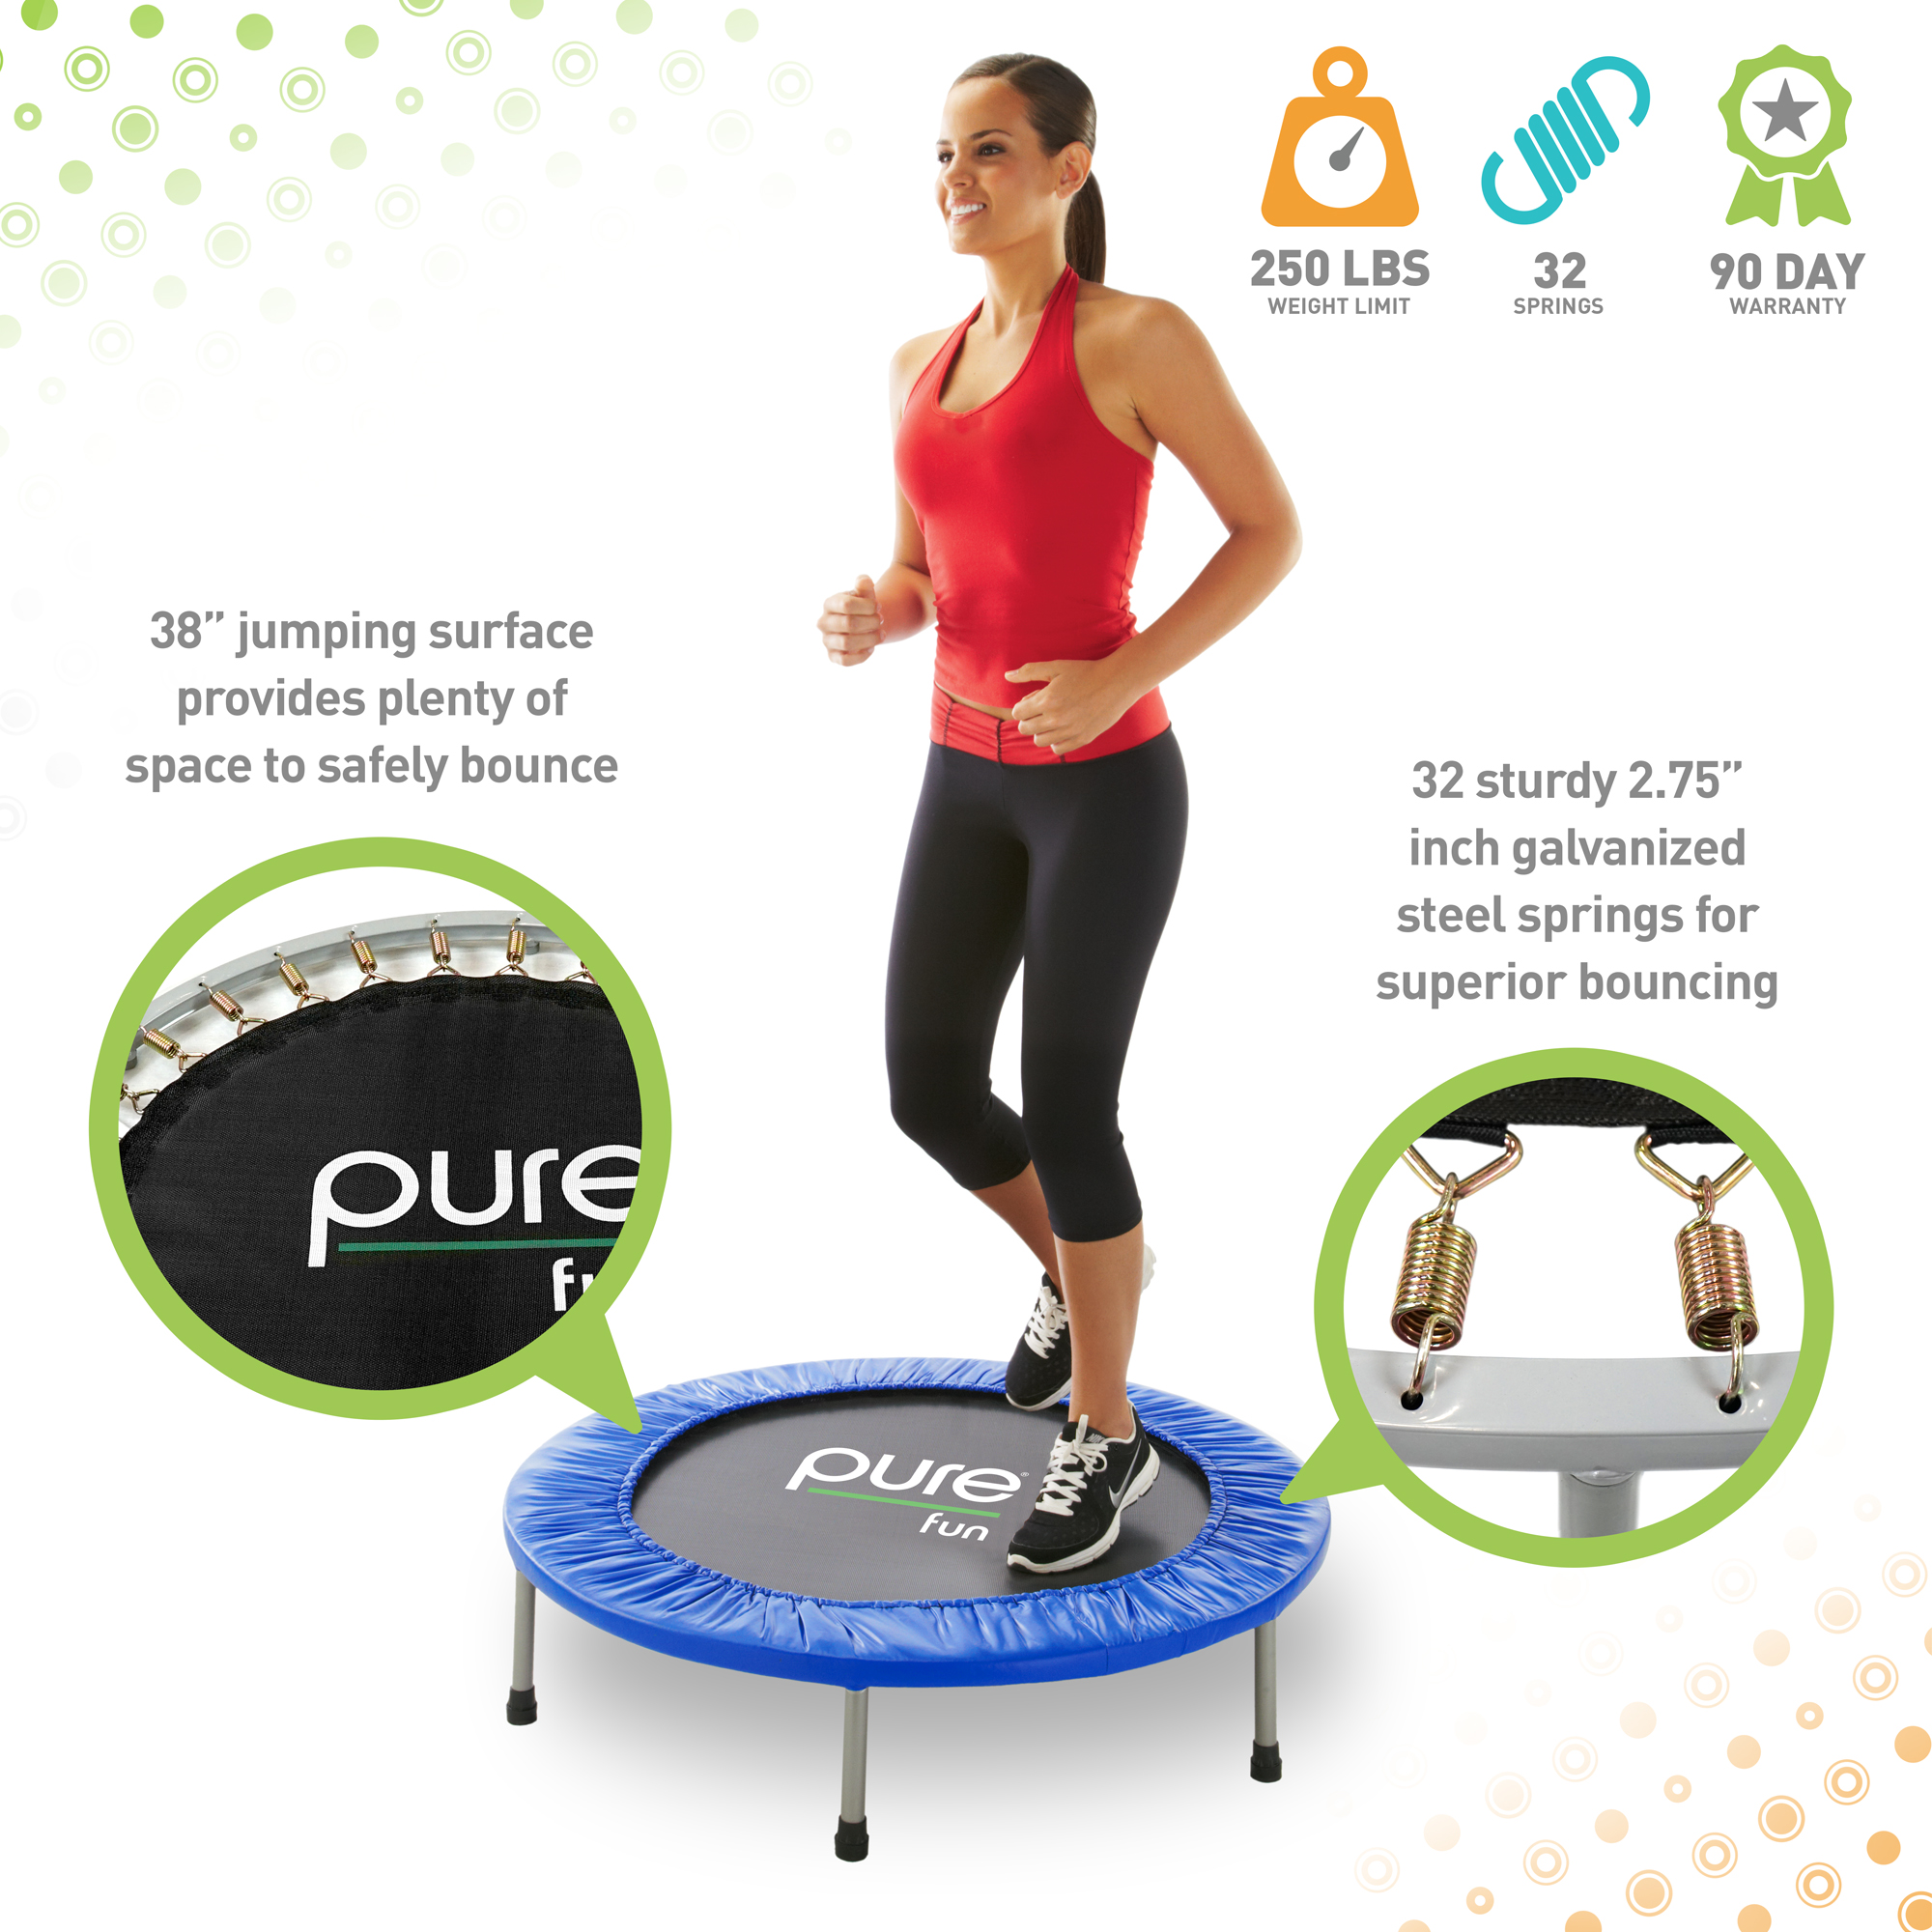 Pure Fun 38-Inch Mini Exercise Trampoline, Rebounder, 250lb Weight Limit - image 2 of 7